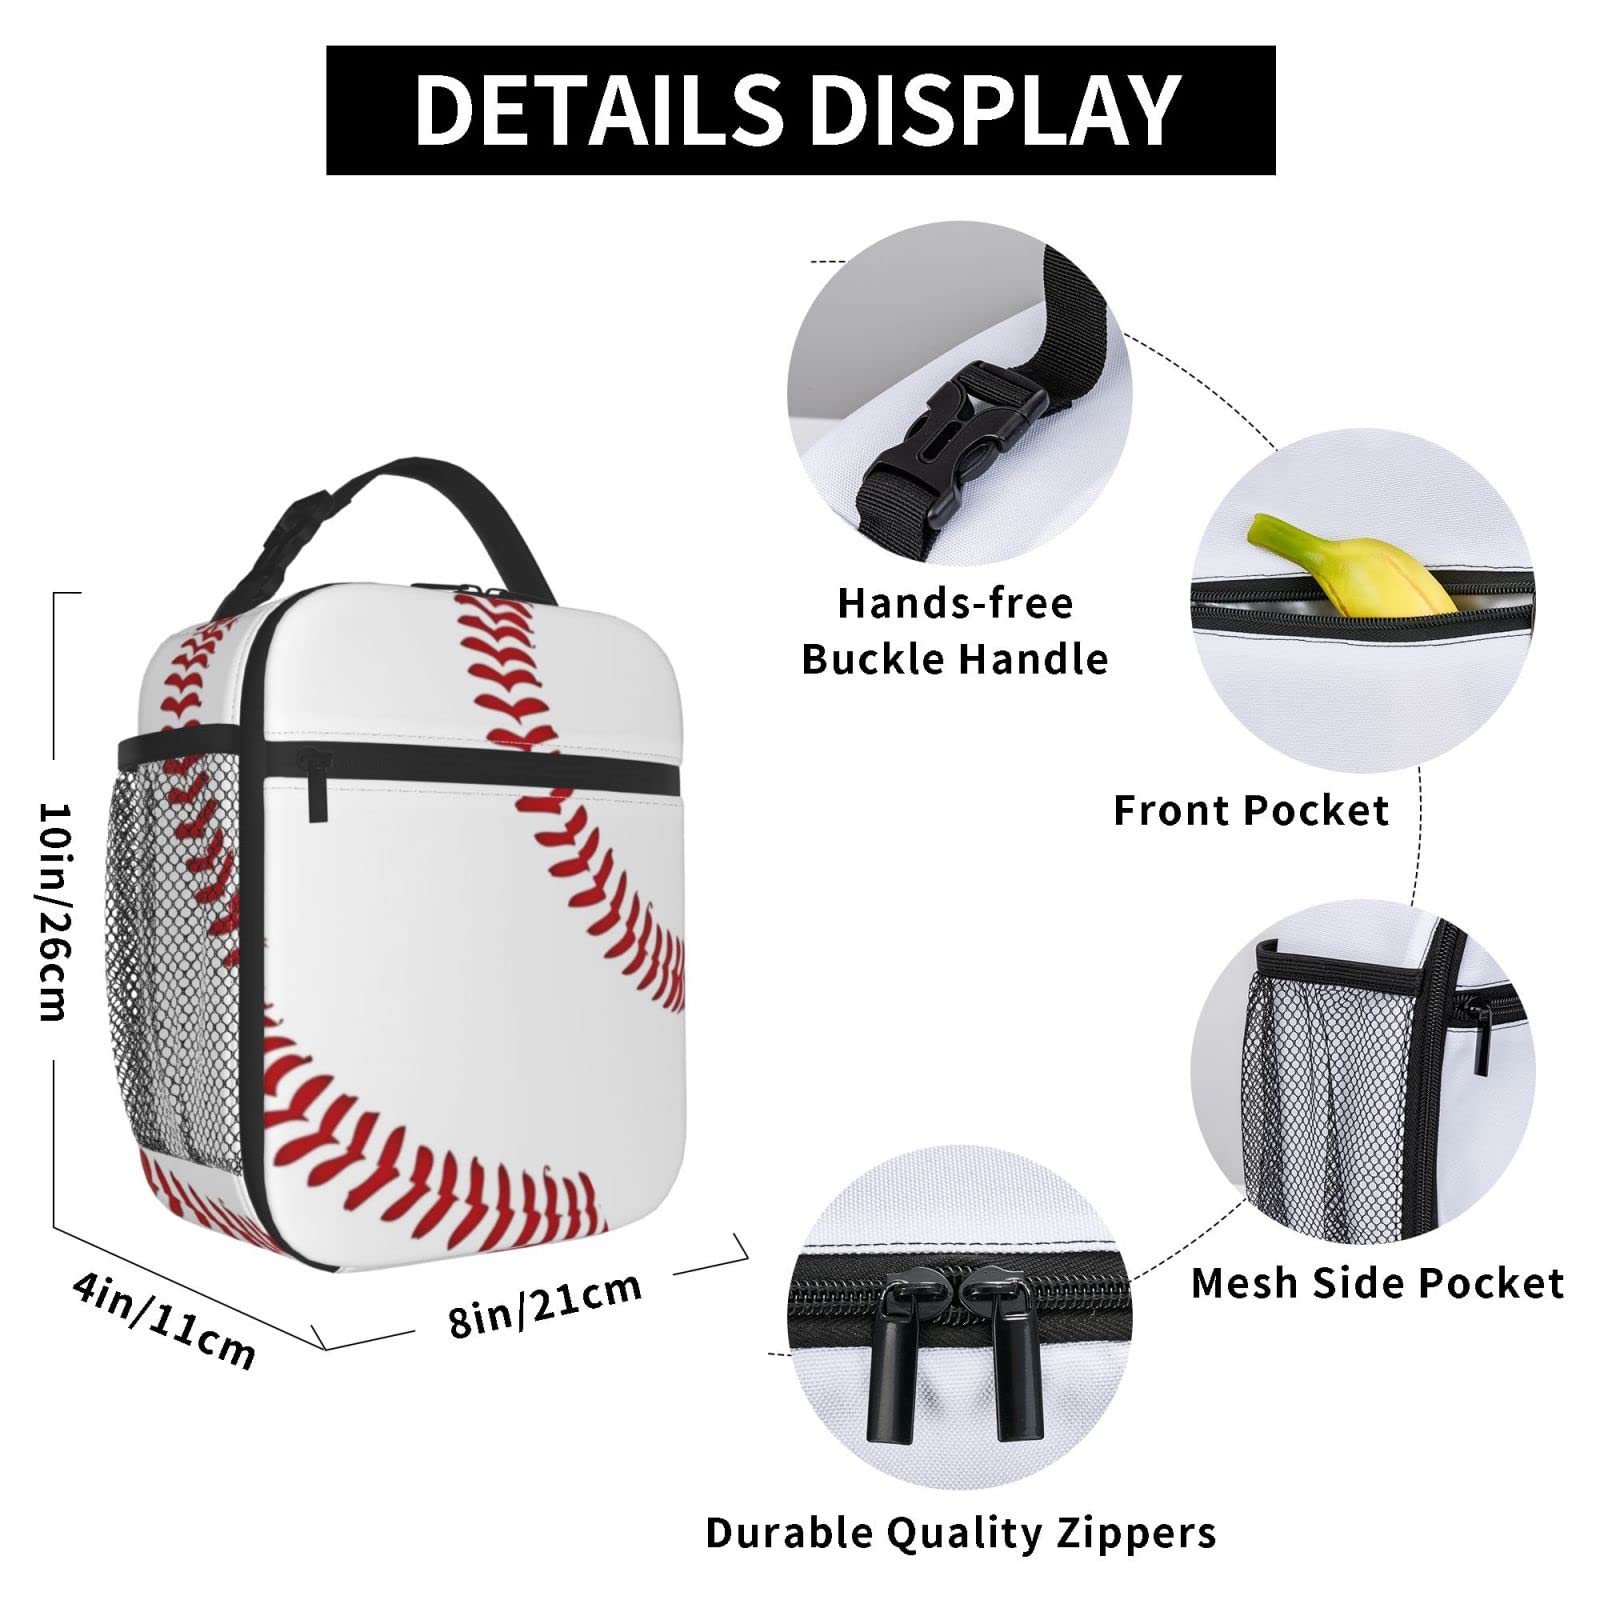 Lunch Box For Men Women Adults Gifts Small Lunch Bag For Office Work Reusable Portable Lunchbox Personalized Baseball Sports